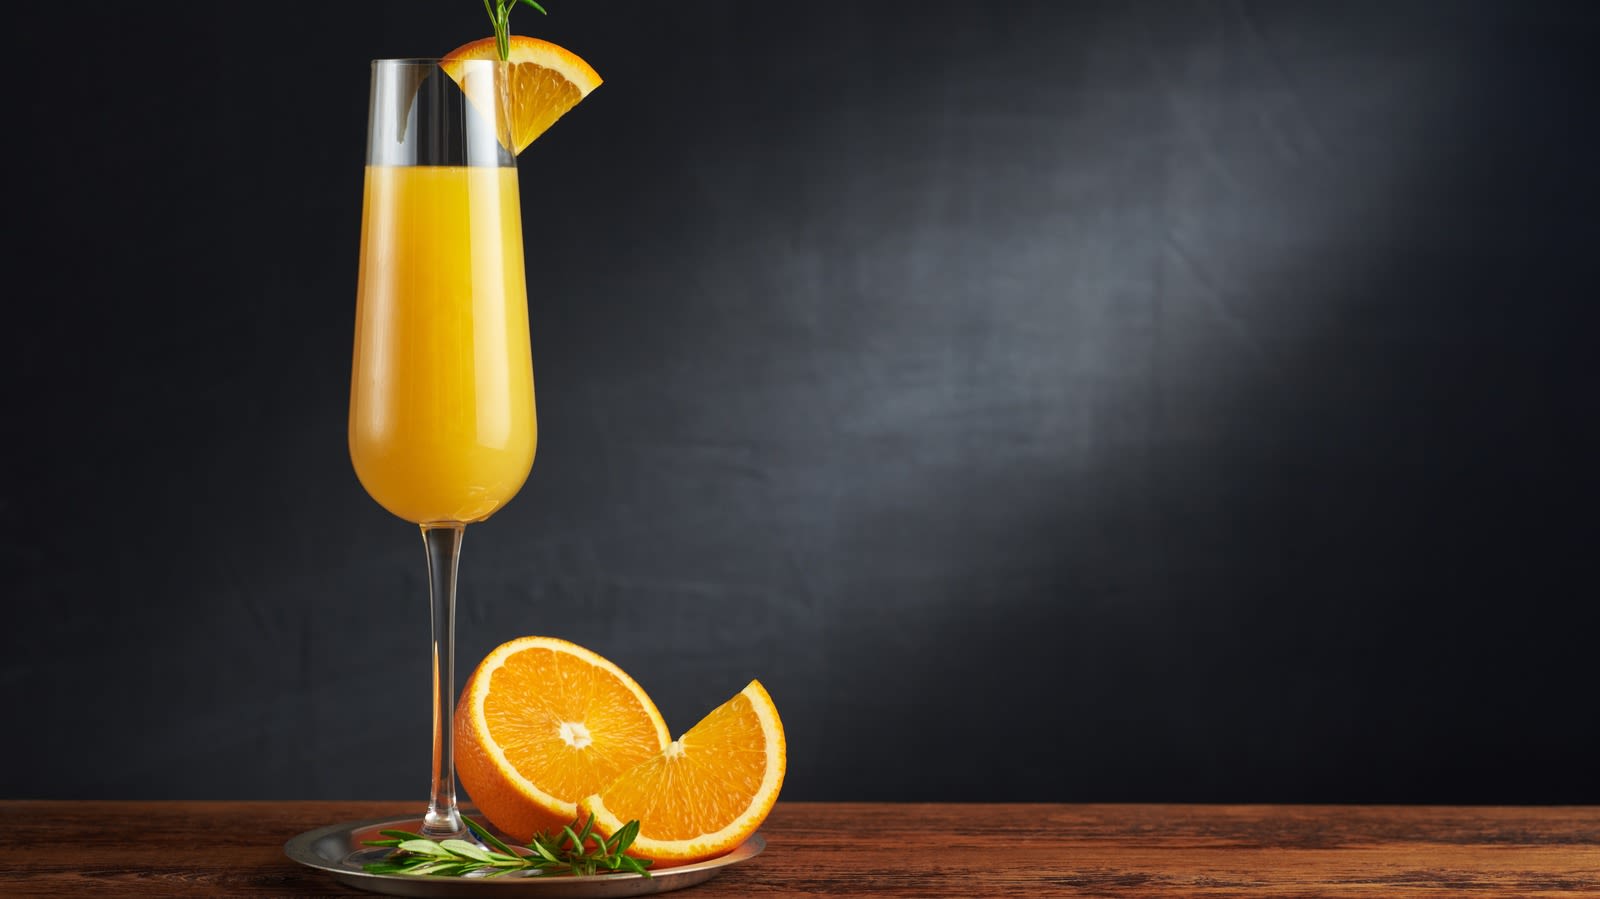 Add Cointreau To Your Mimosa For A Sweeter Taste